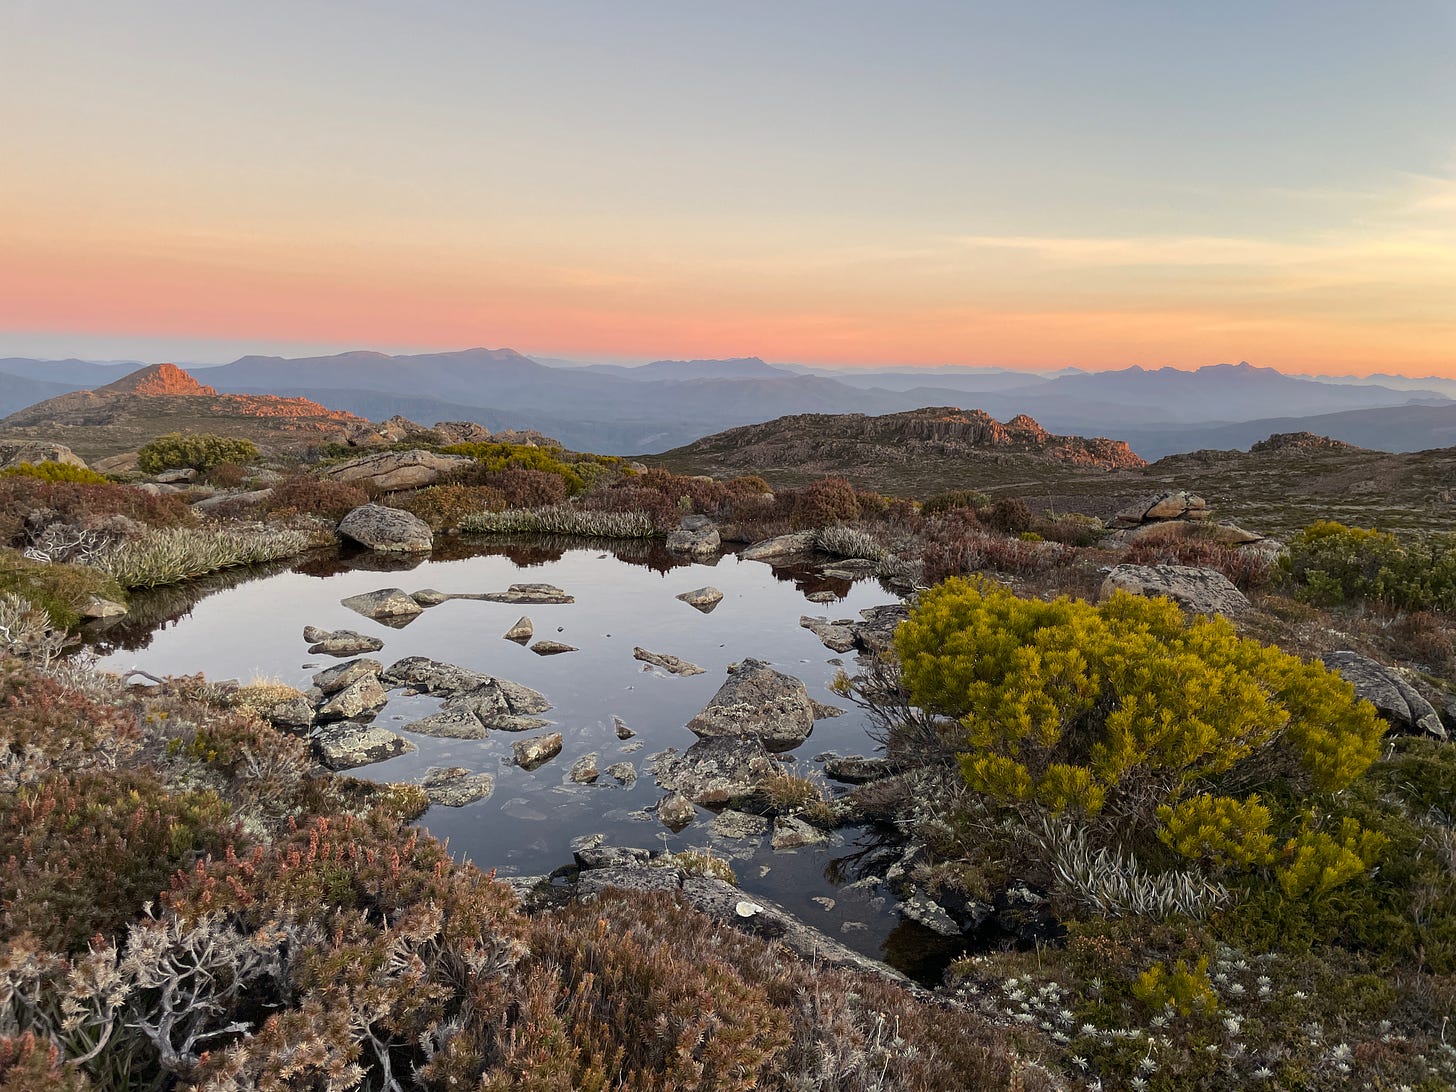 sunrise on Floretine Plateau Mount Field National Park. Peach horizon, blue clear sky, blue mountains in the distance, alpine planst and a tarn